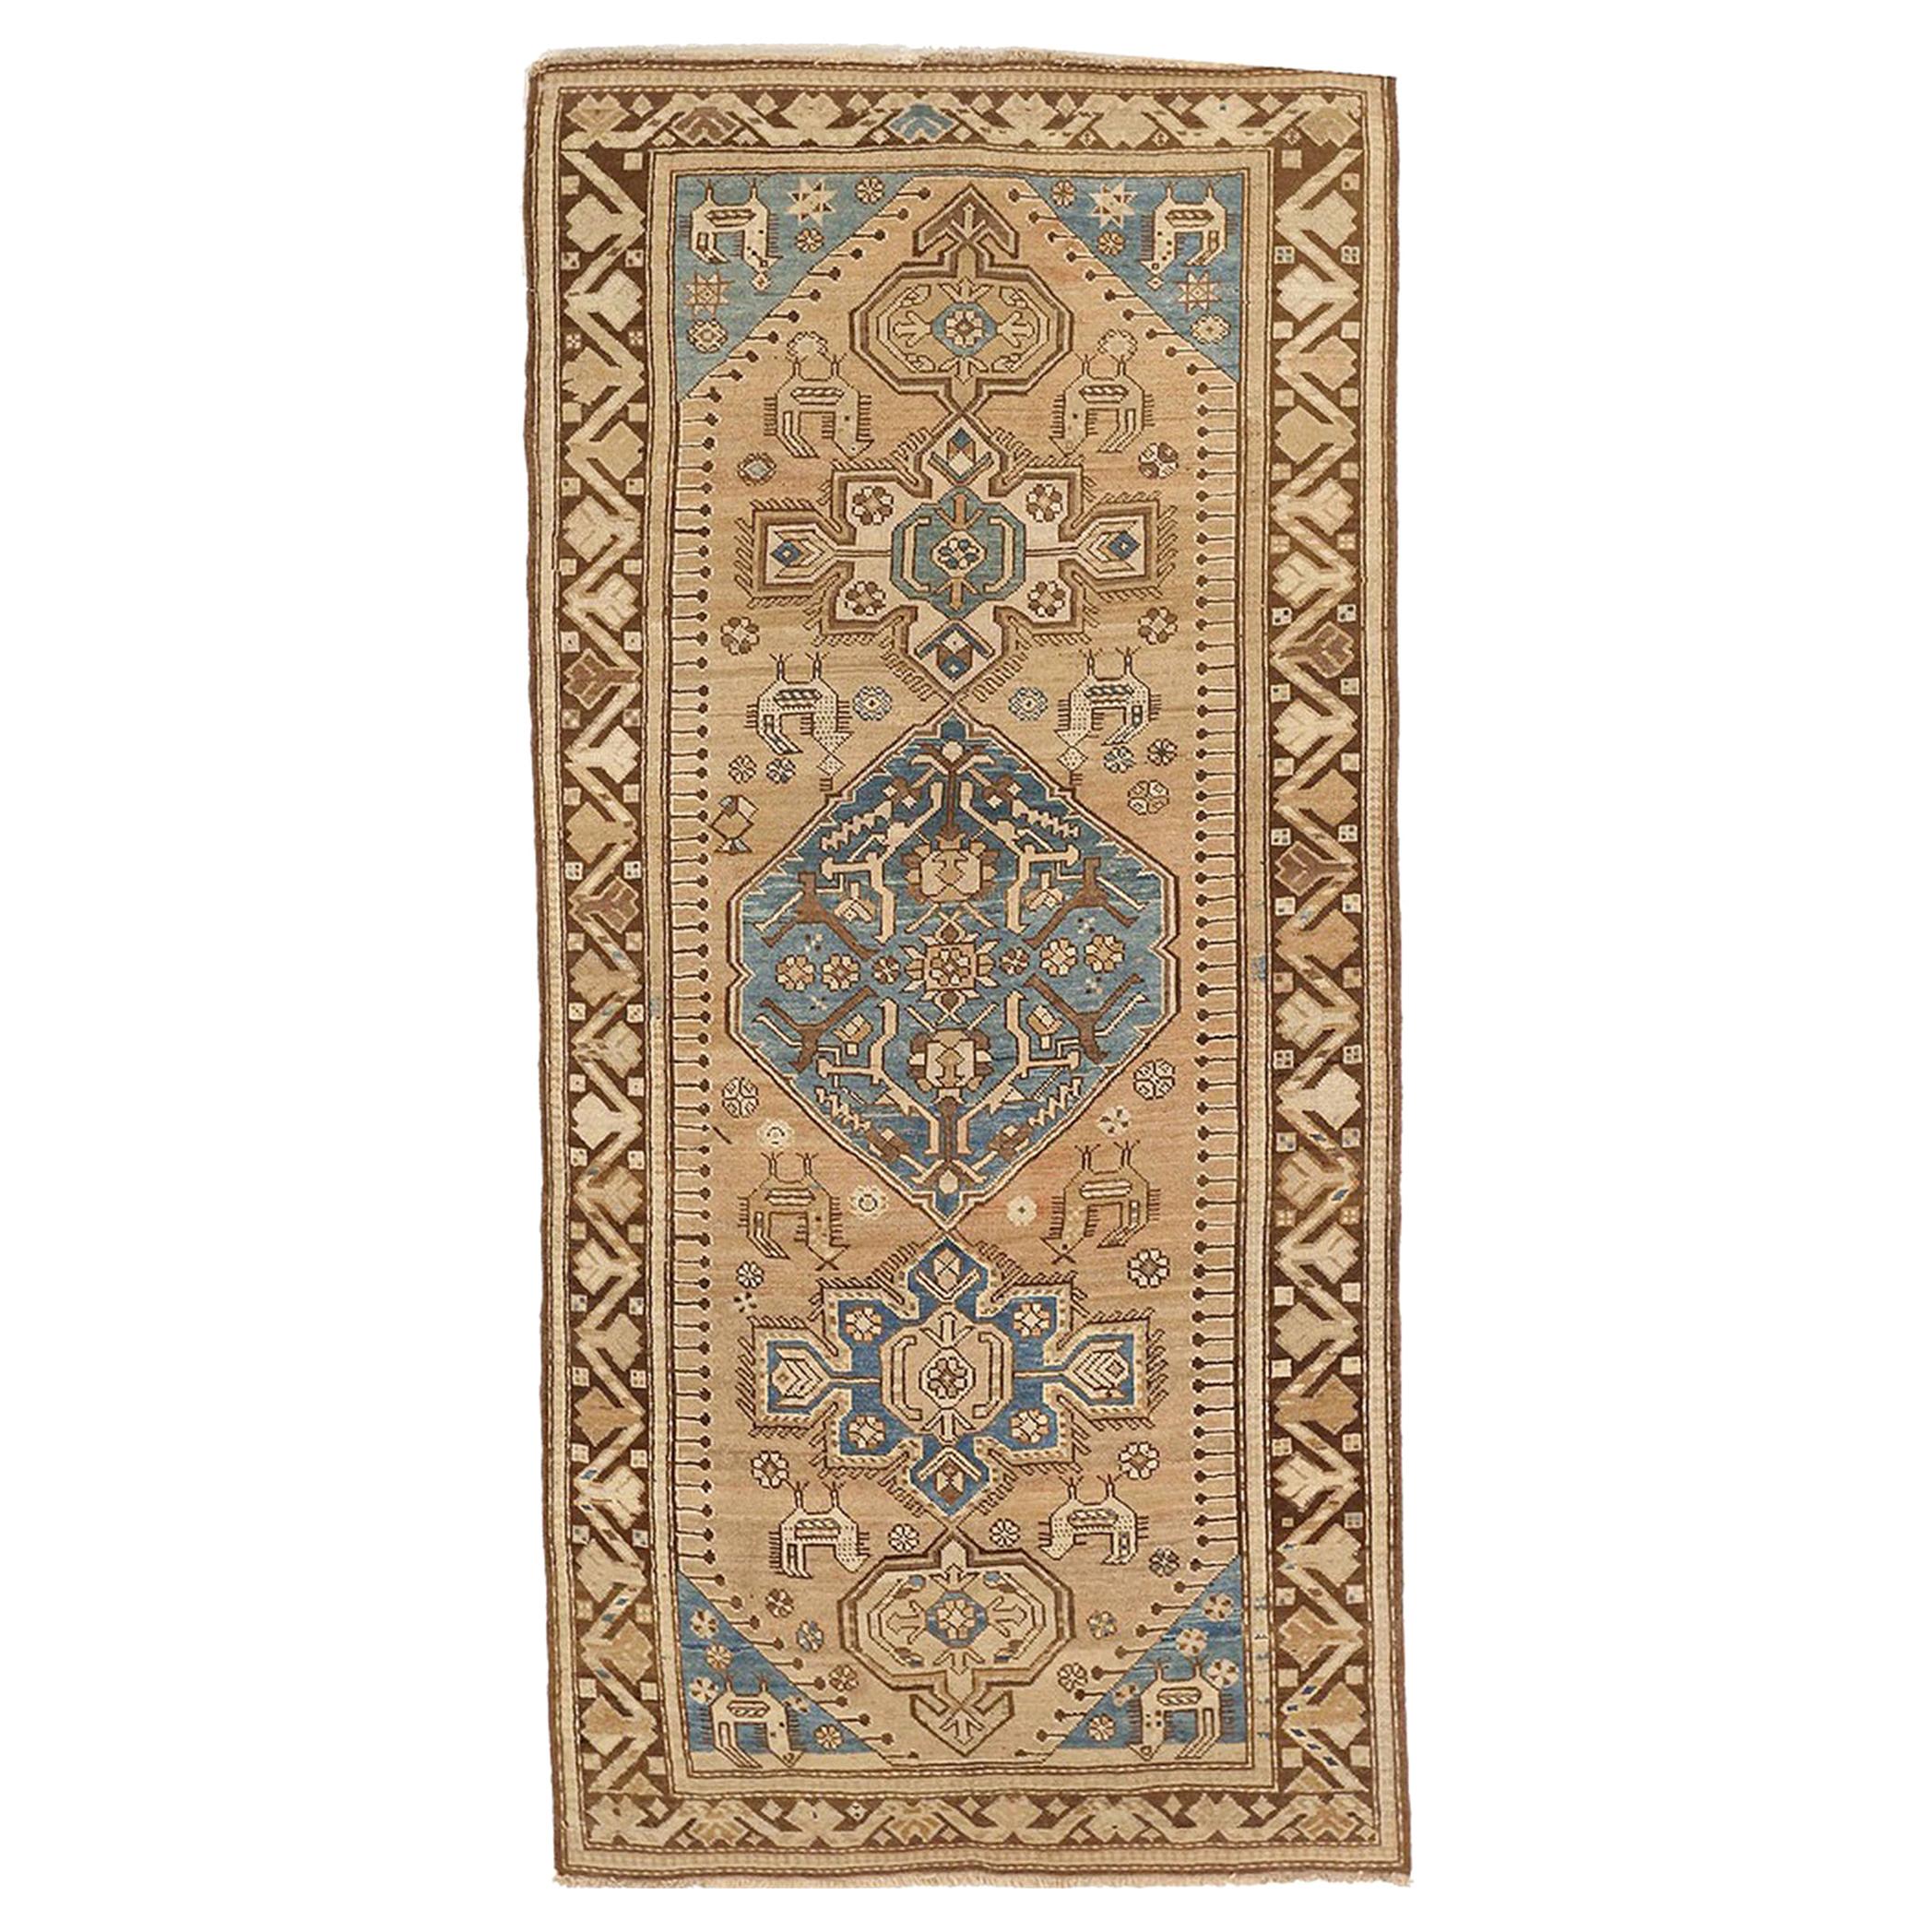 Antique Russian Kazak Rug with Brown and Blue Flower Medallions